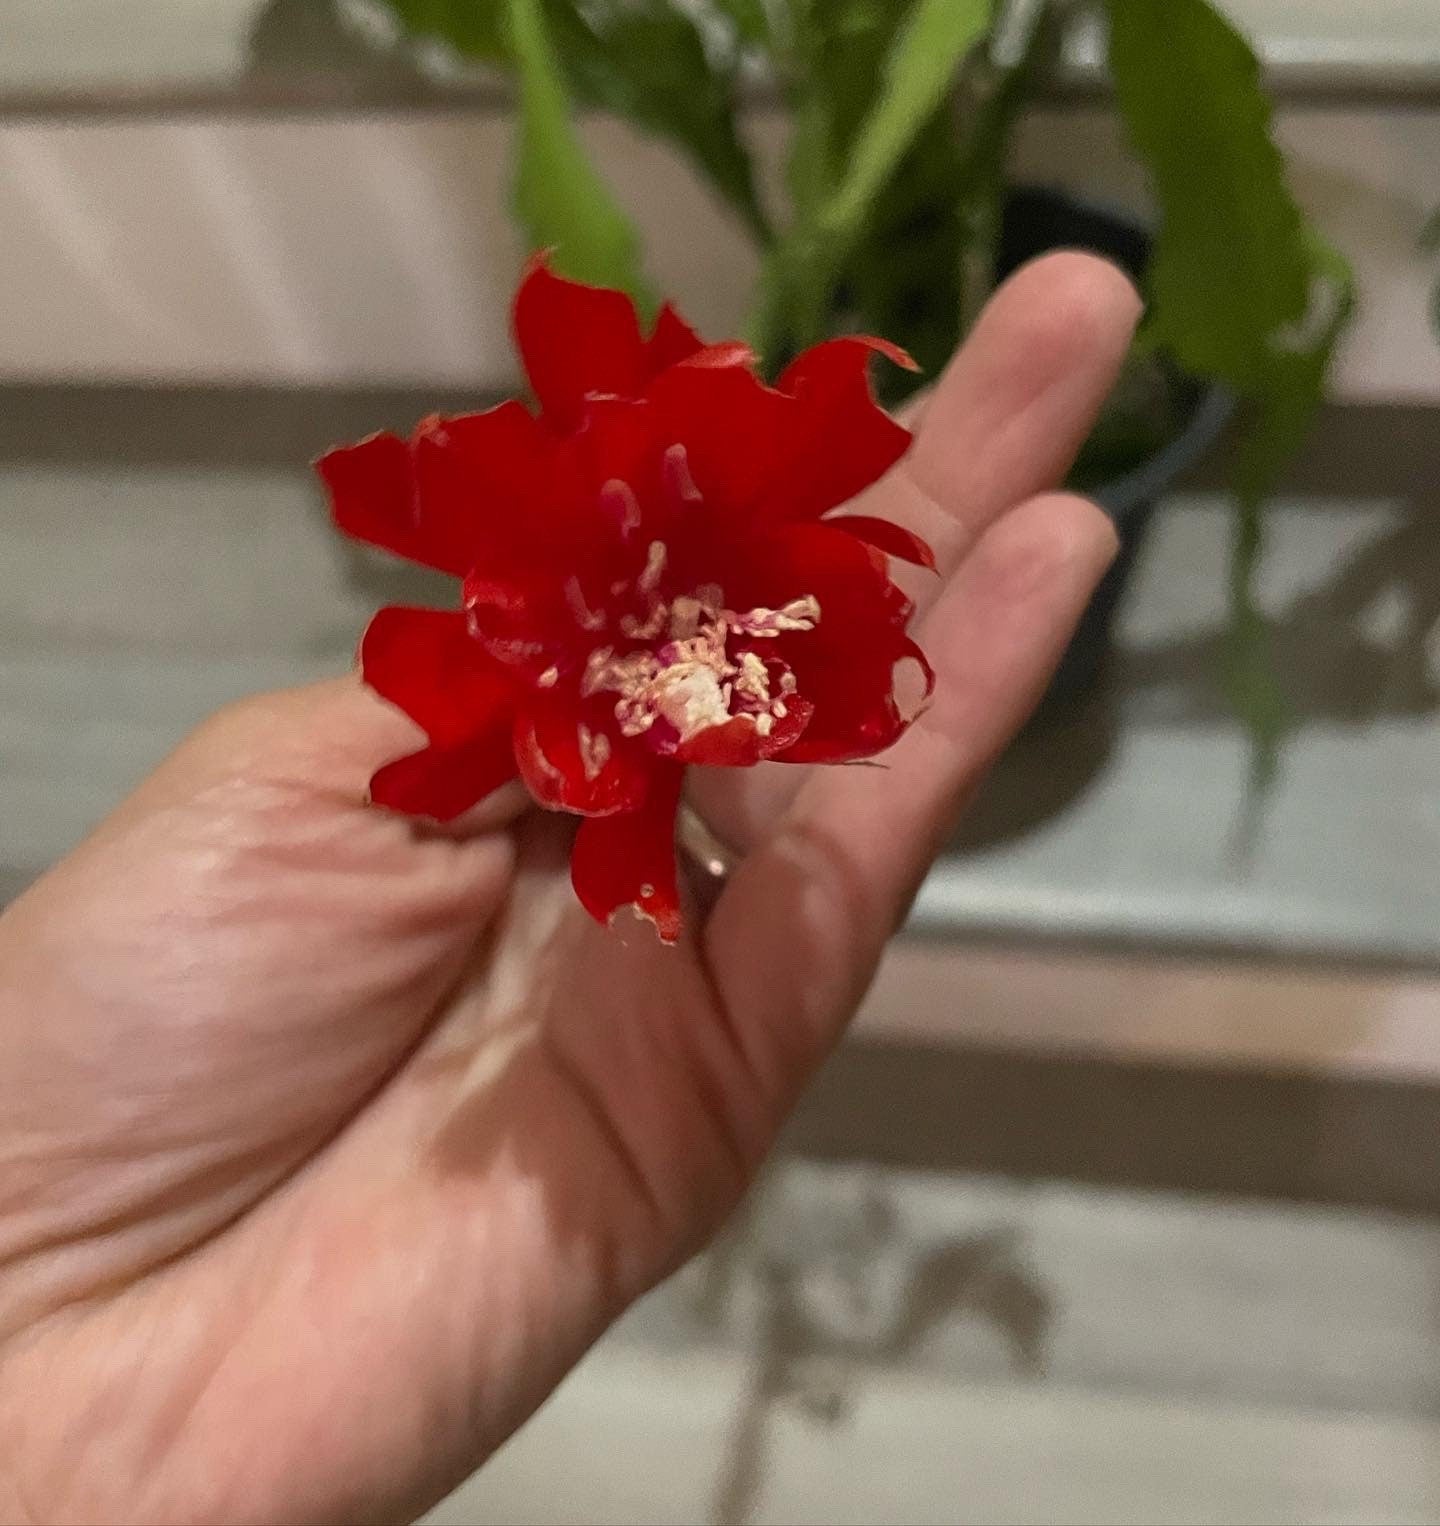 XL -1 gallon -rare red flower epiphyllum-exact plant as picture -blooming as of 10/1- small red flowers noid Disocactus hybrid .